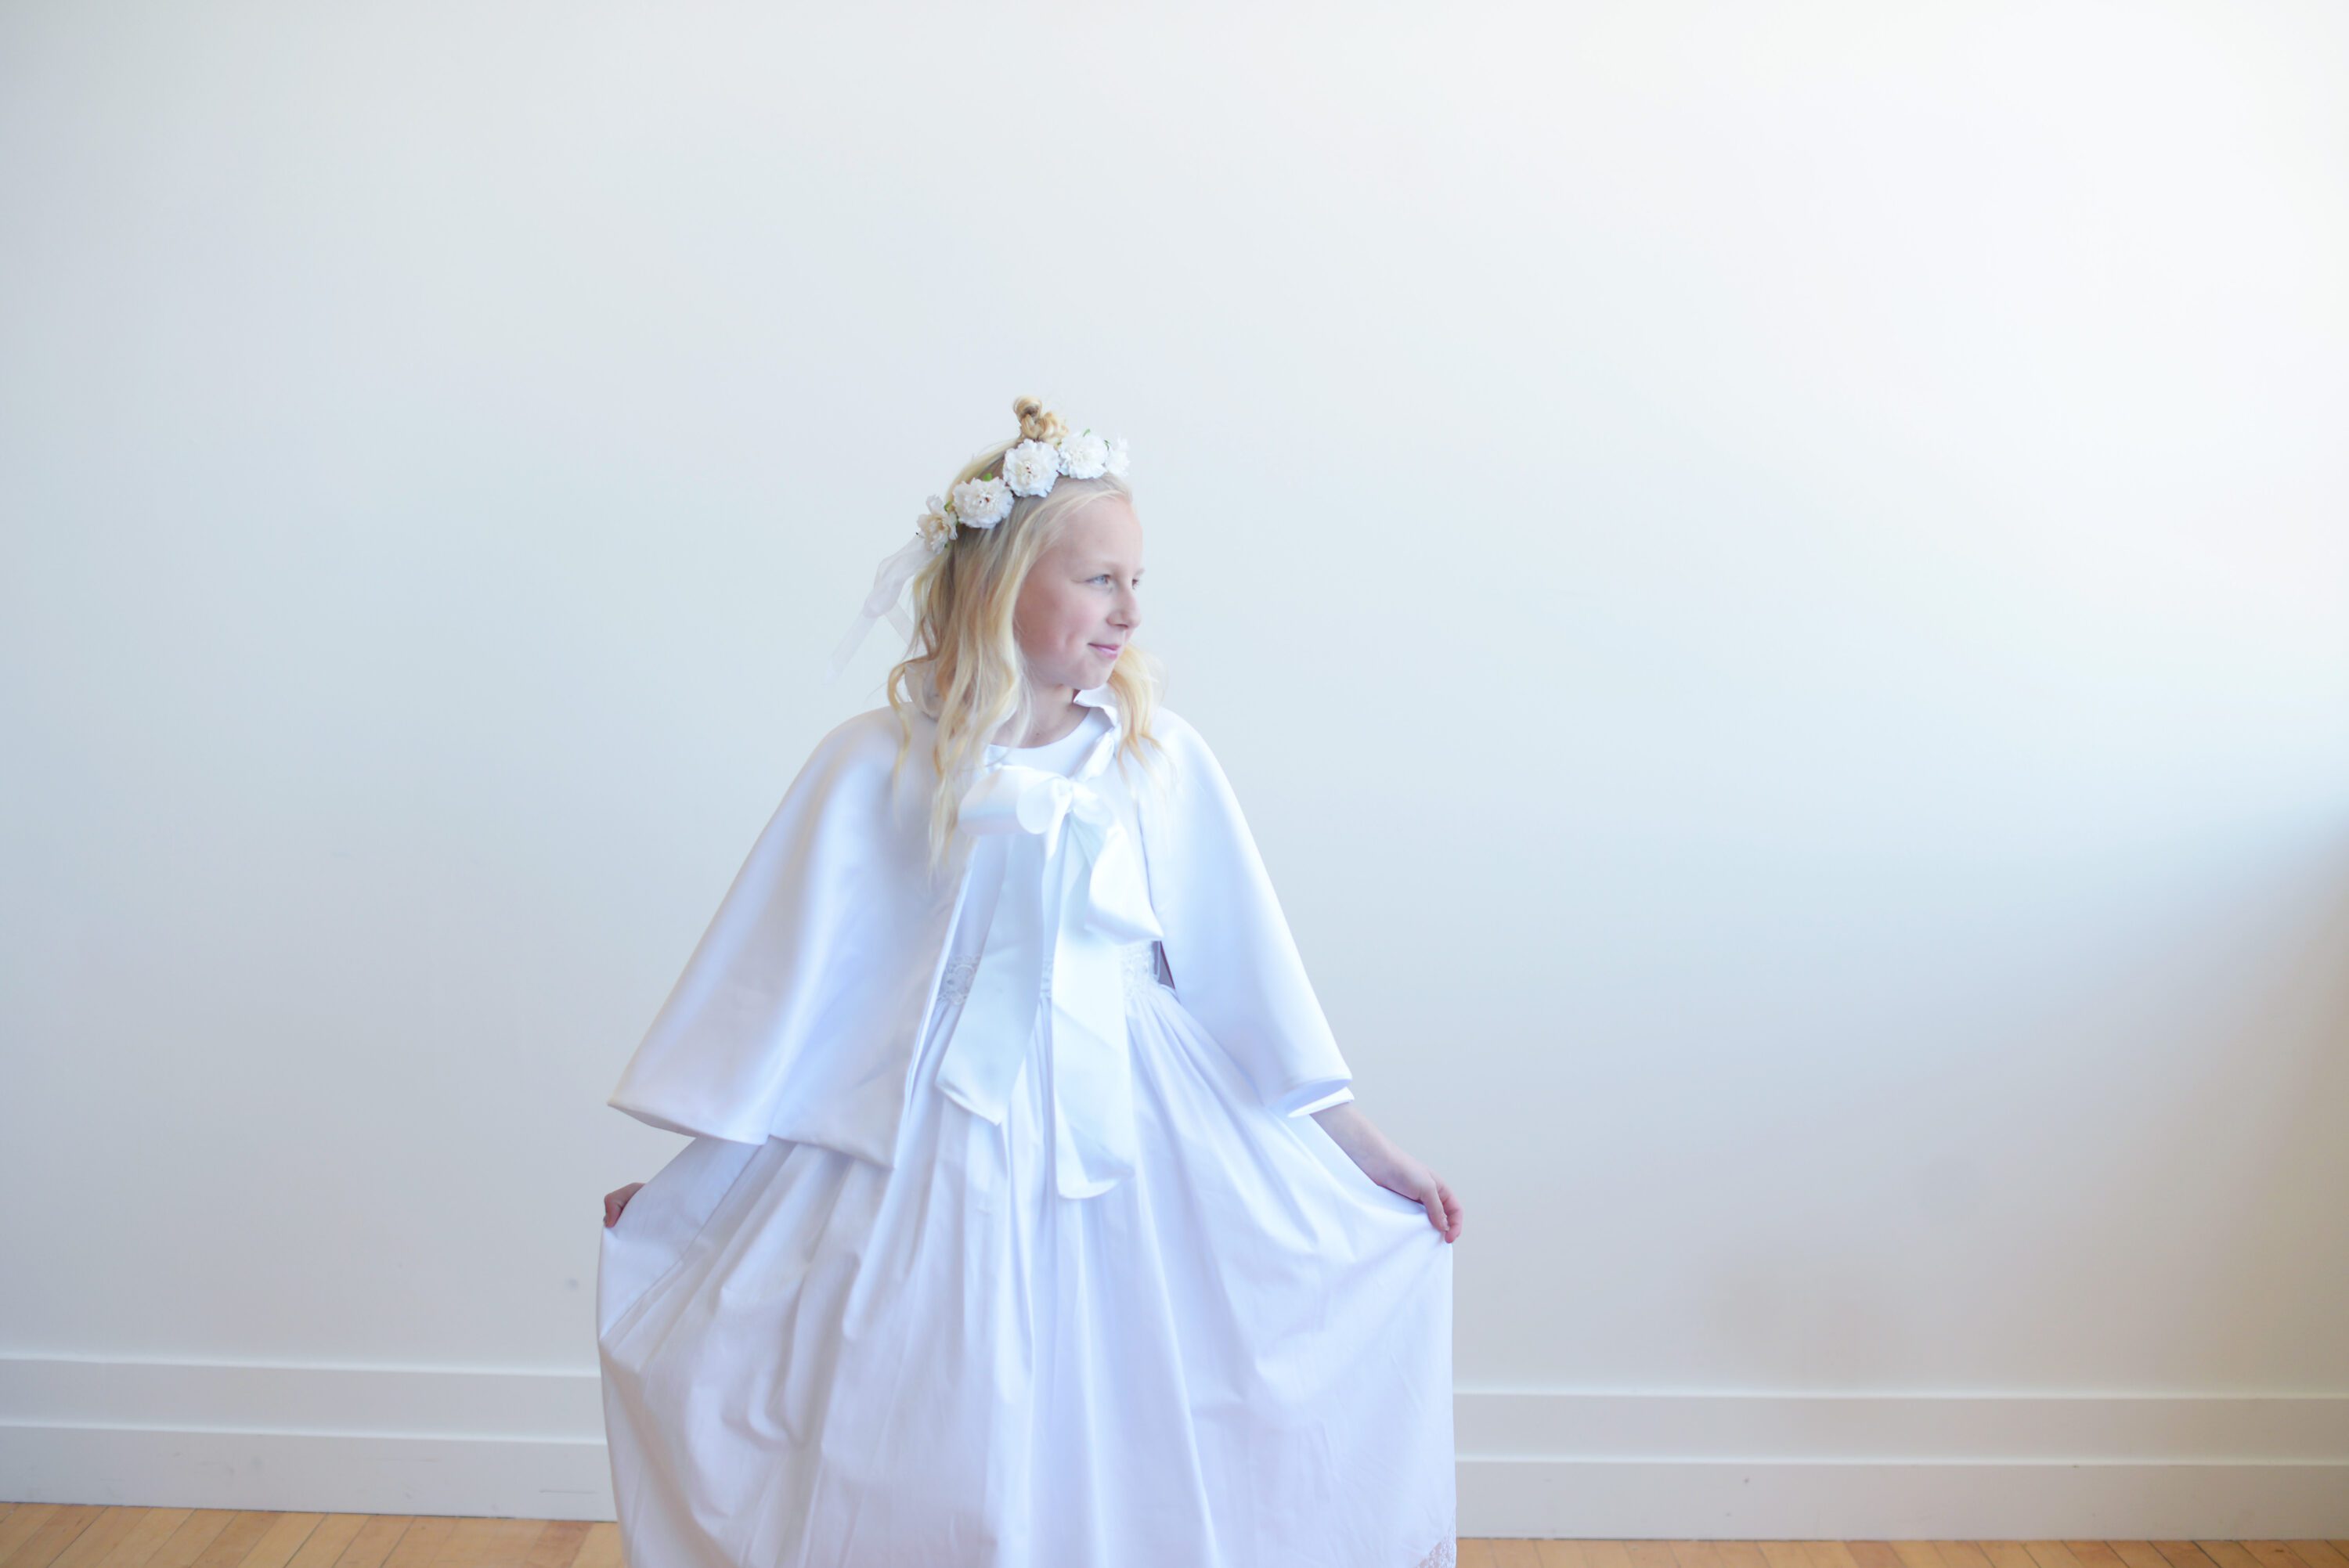 A photo of an 8 year old girl wearing a white communion dress with a lace sash and a communion cape